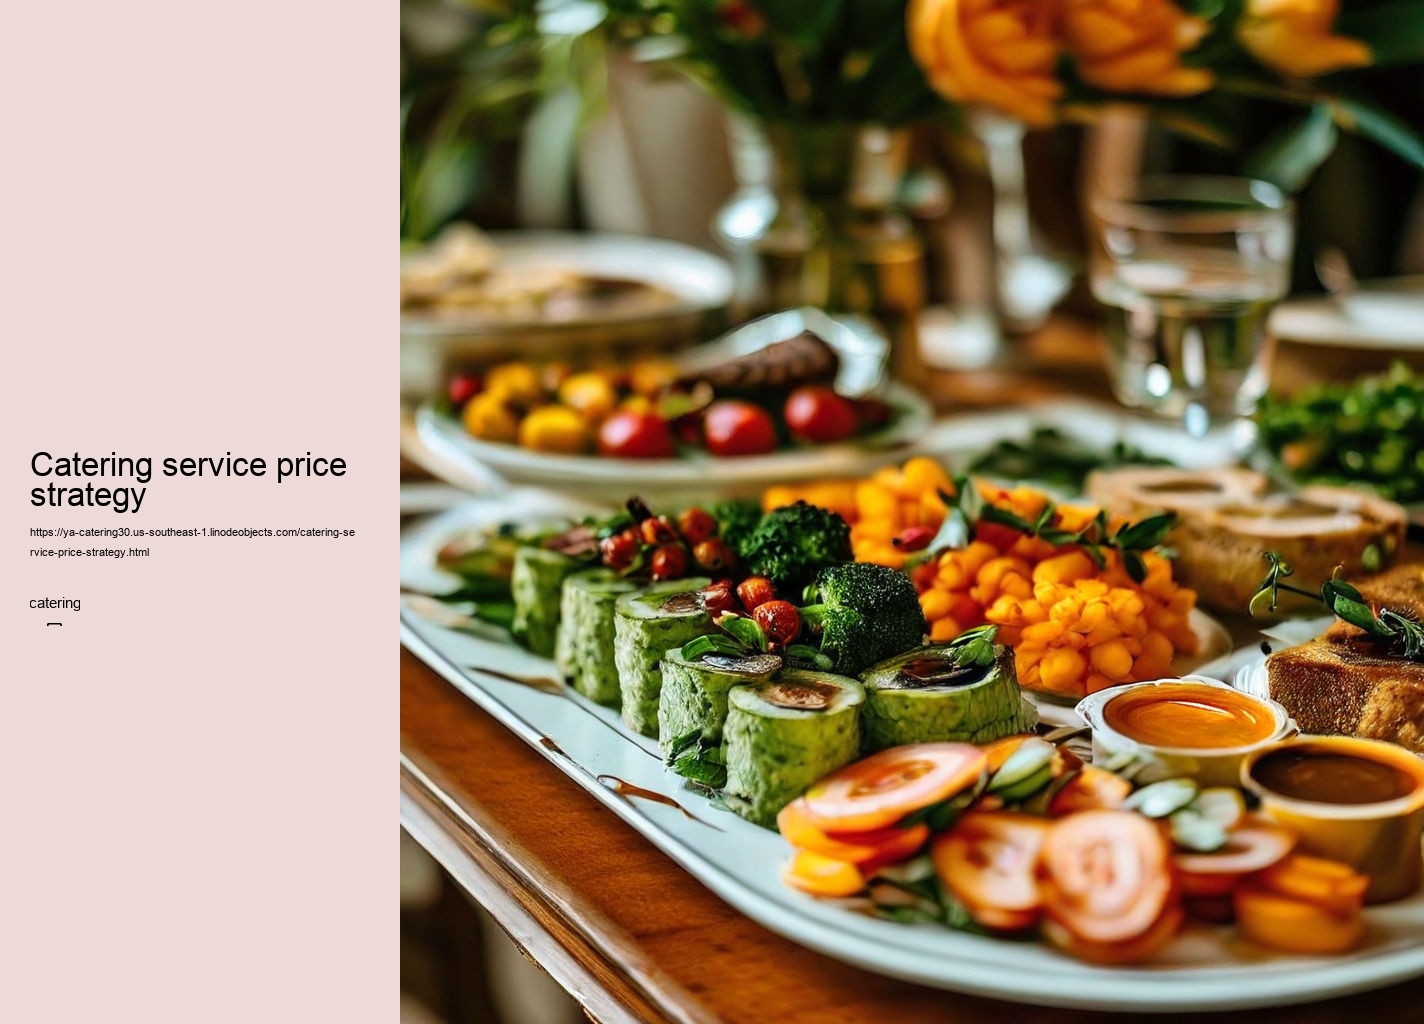 Catering service price strategy